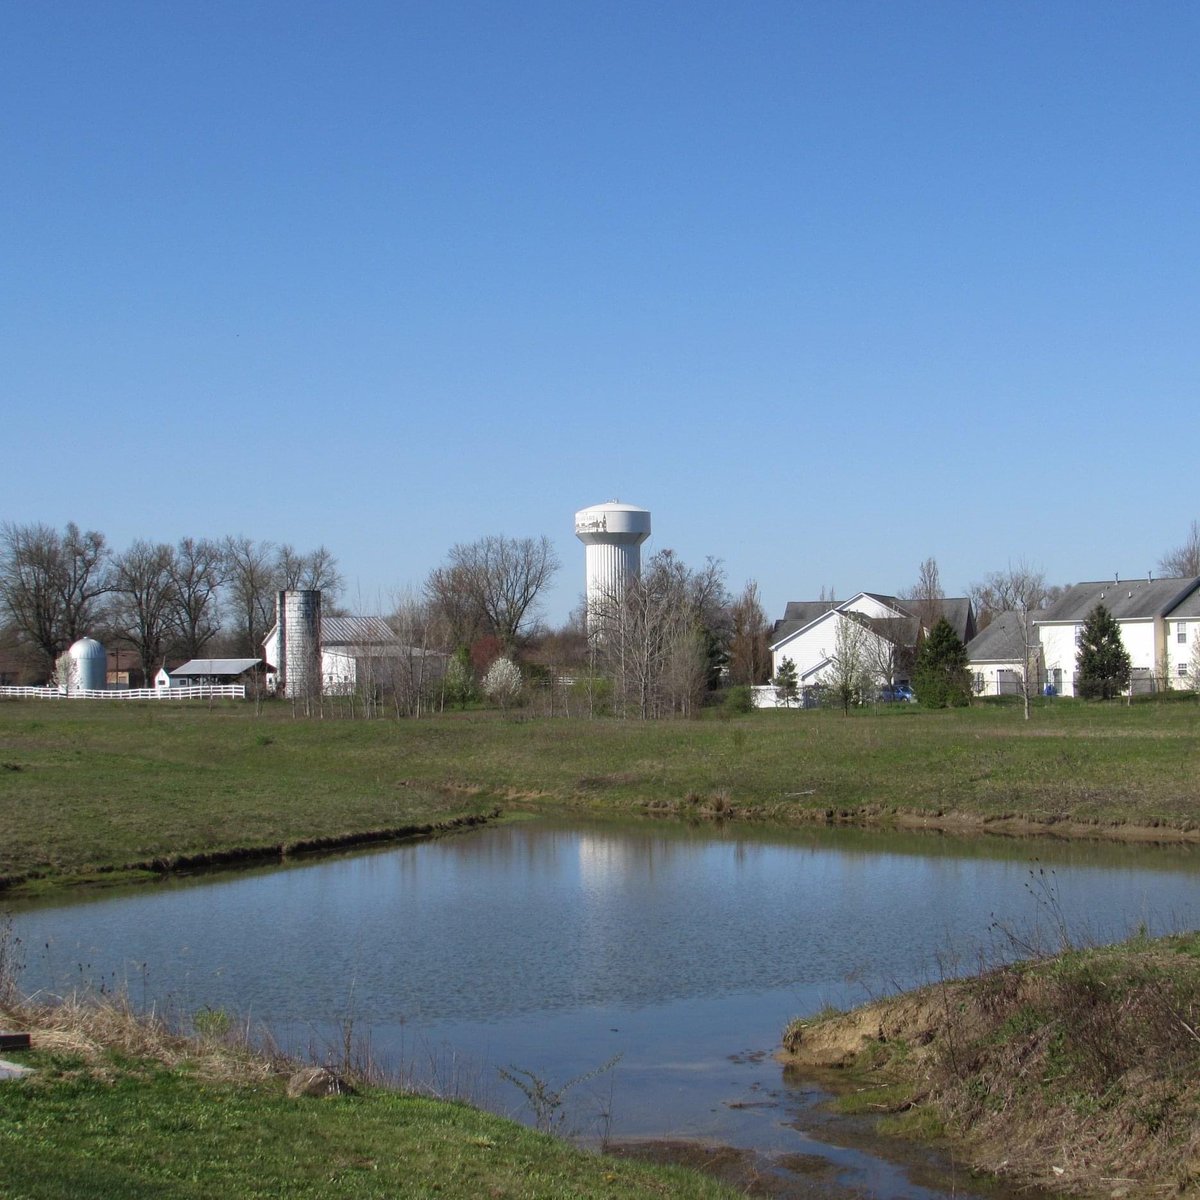 On a #clear #day… #ohio #outdoors #nature #blueskies #cloudless #watertower #pond #acrossthepond #pondside #pondlife #midwest #perfectday #greenery #greengrass #spring #springtime #beauty #sunshine #trees #naturephotography #outmybackdoorbydenise